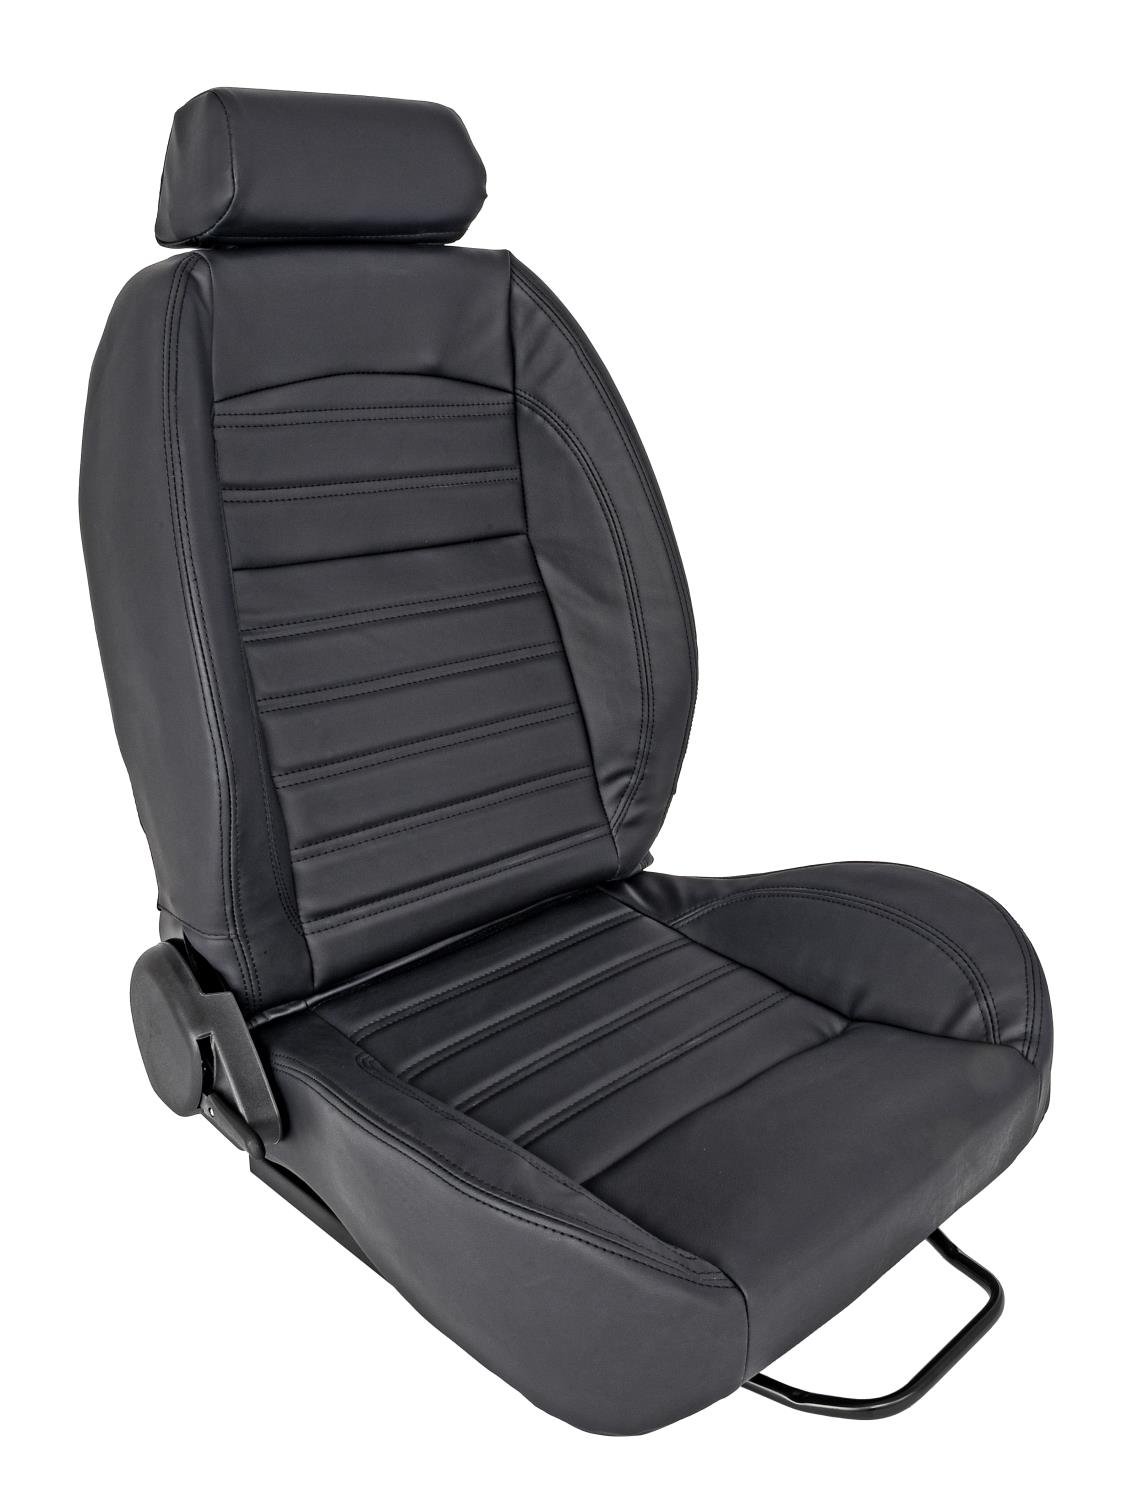 Retro Low Back Reclining Bucket Seat with Headrest, Right/Passenger Side [Black]